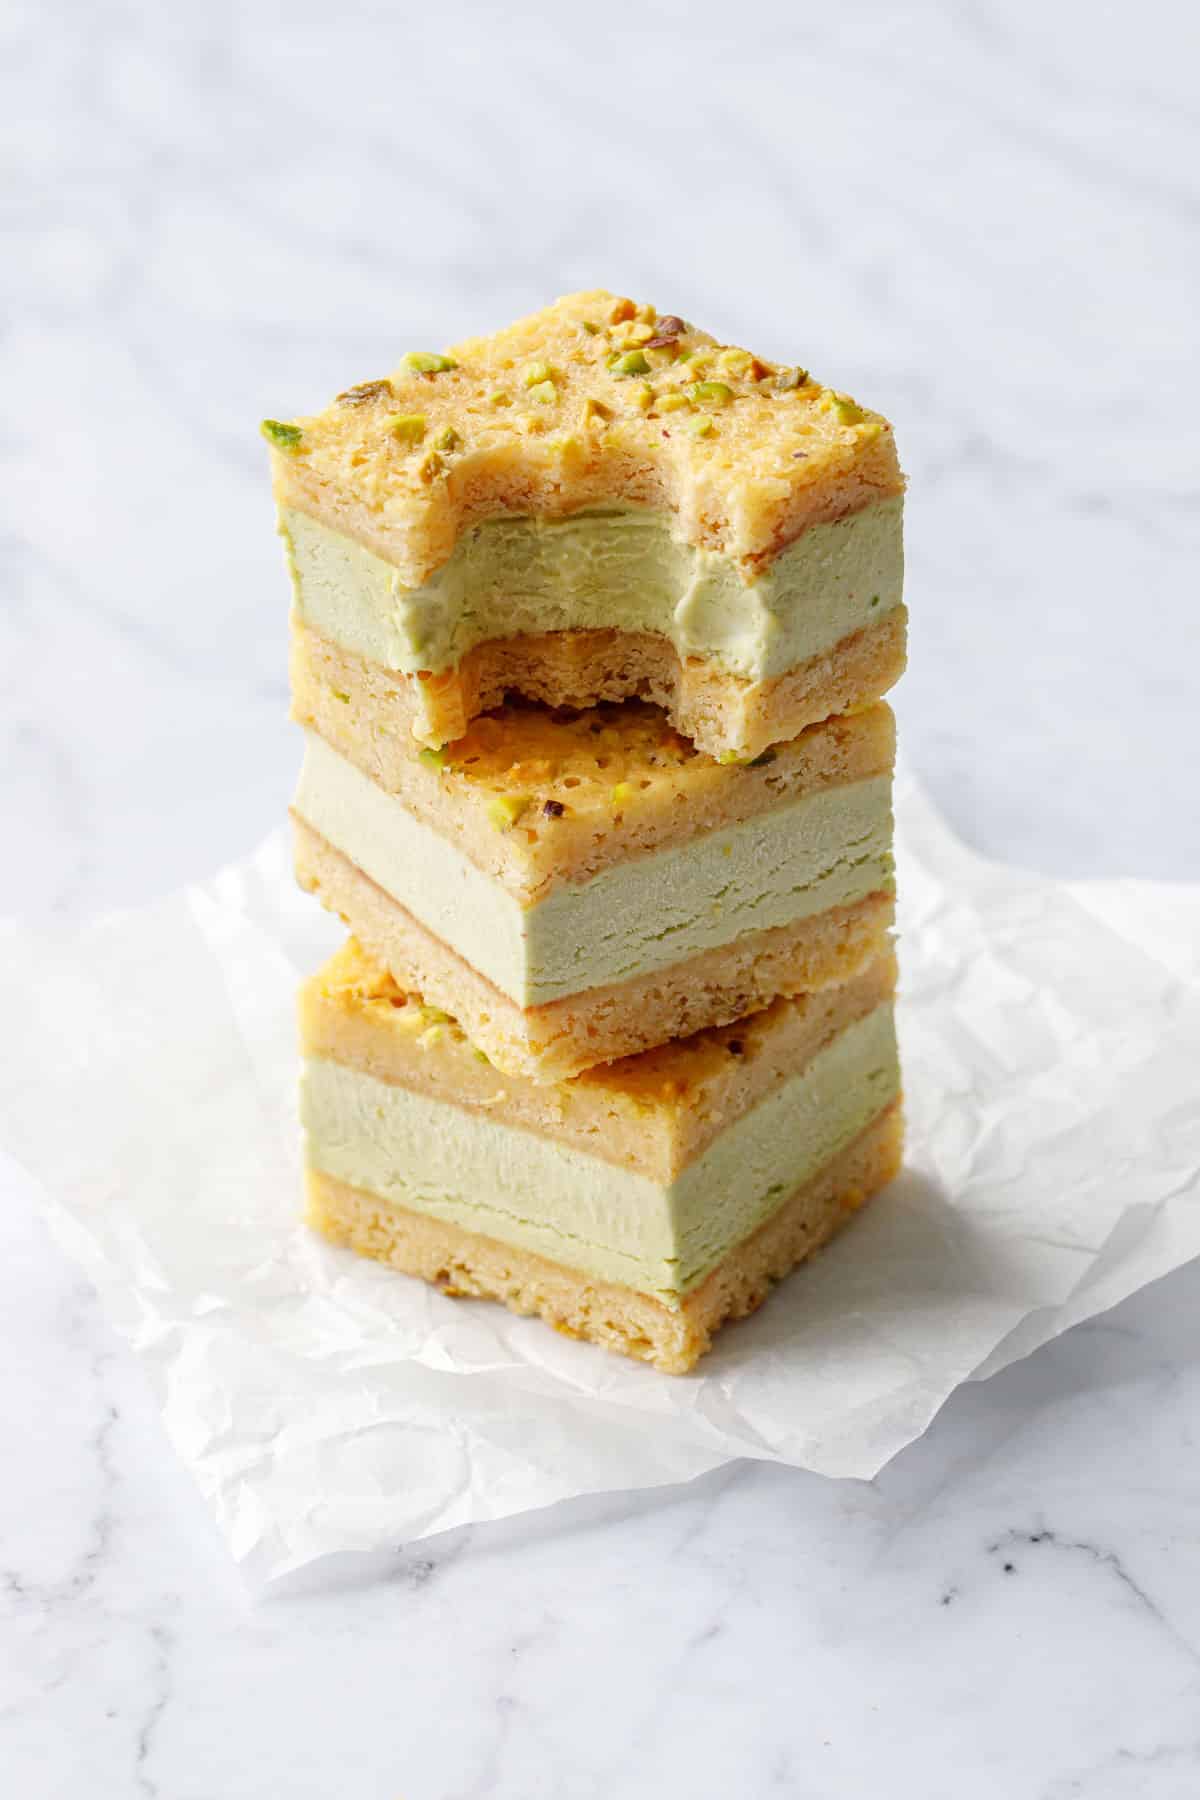 Stack of square cut Pistachio Blondie Ice Cream Sandwiches, one with a bite cut out of it to show the texture and layers.